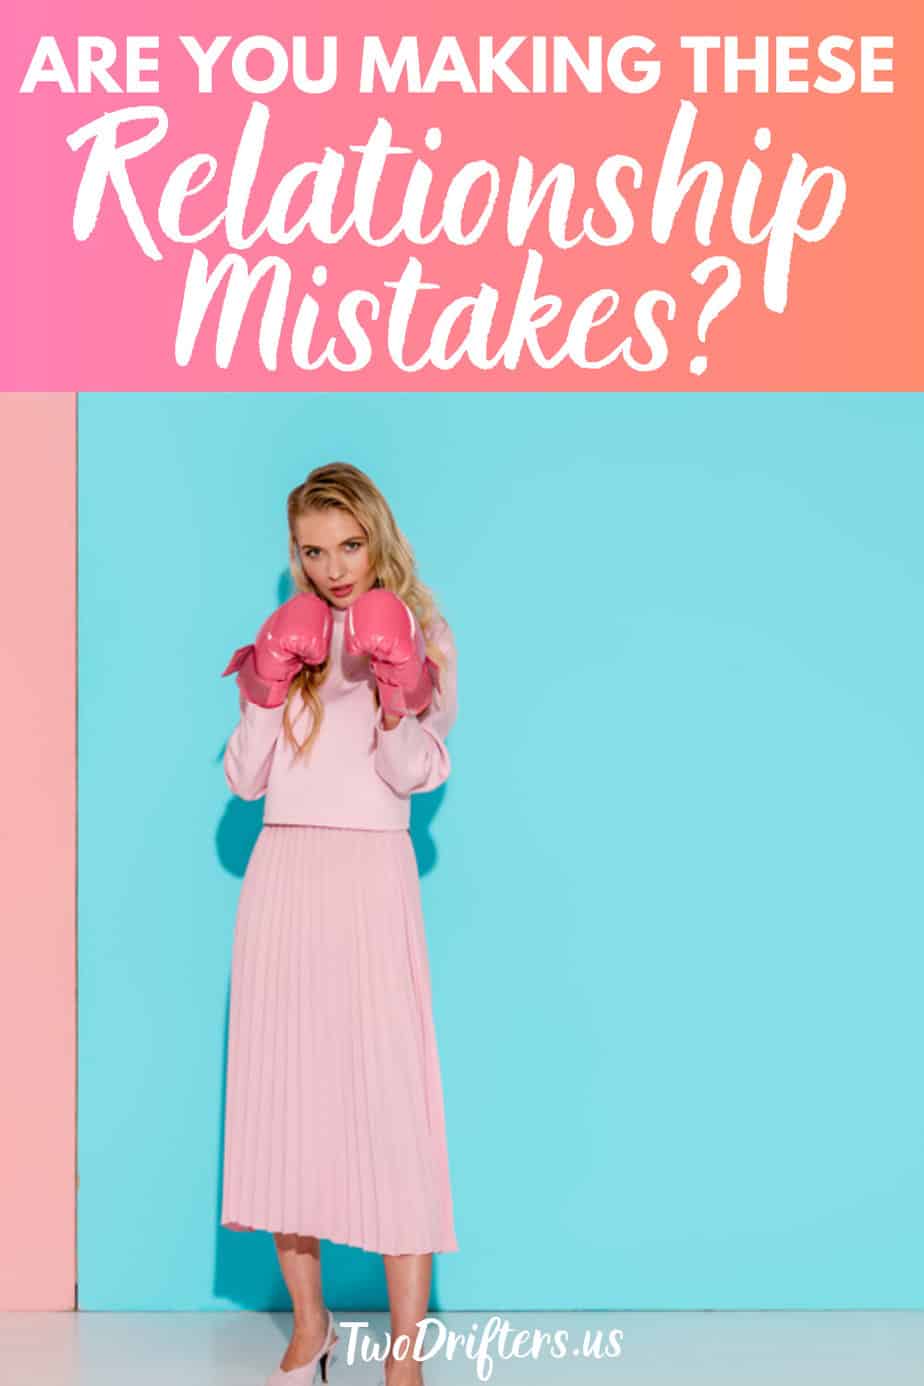 Pinterest social share image that says "Are you making these relationship mistakes?"